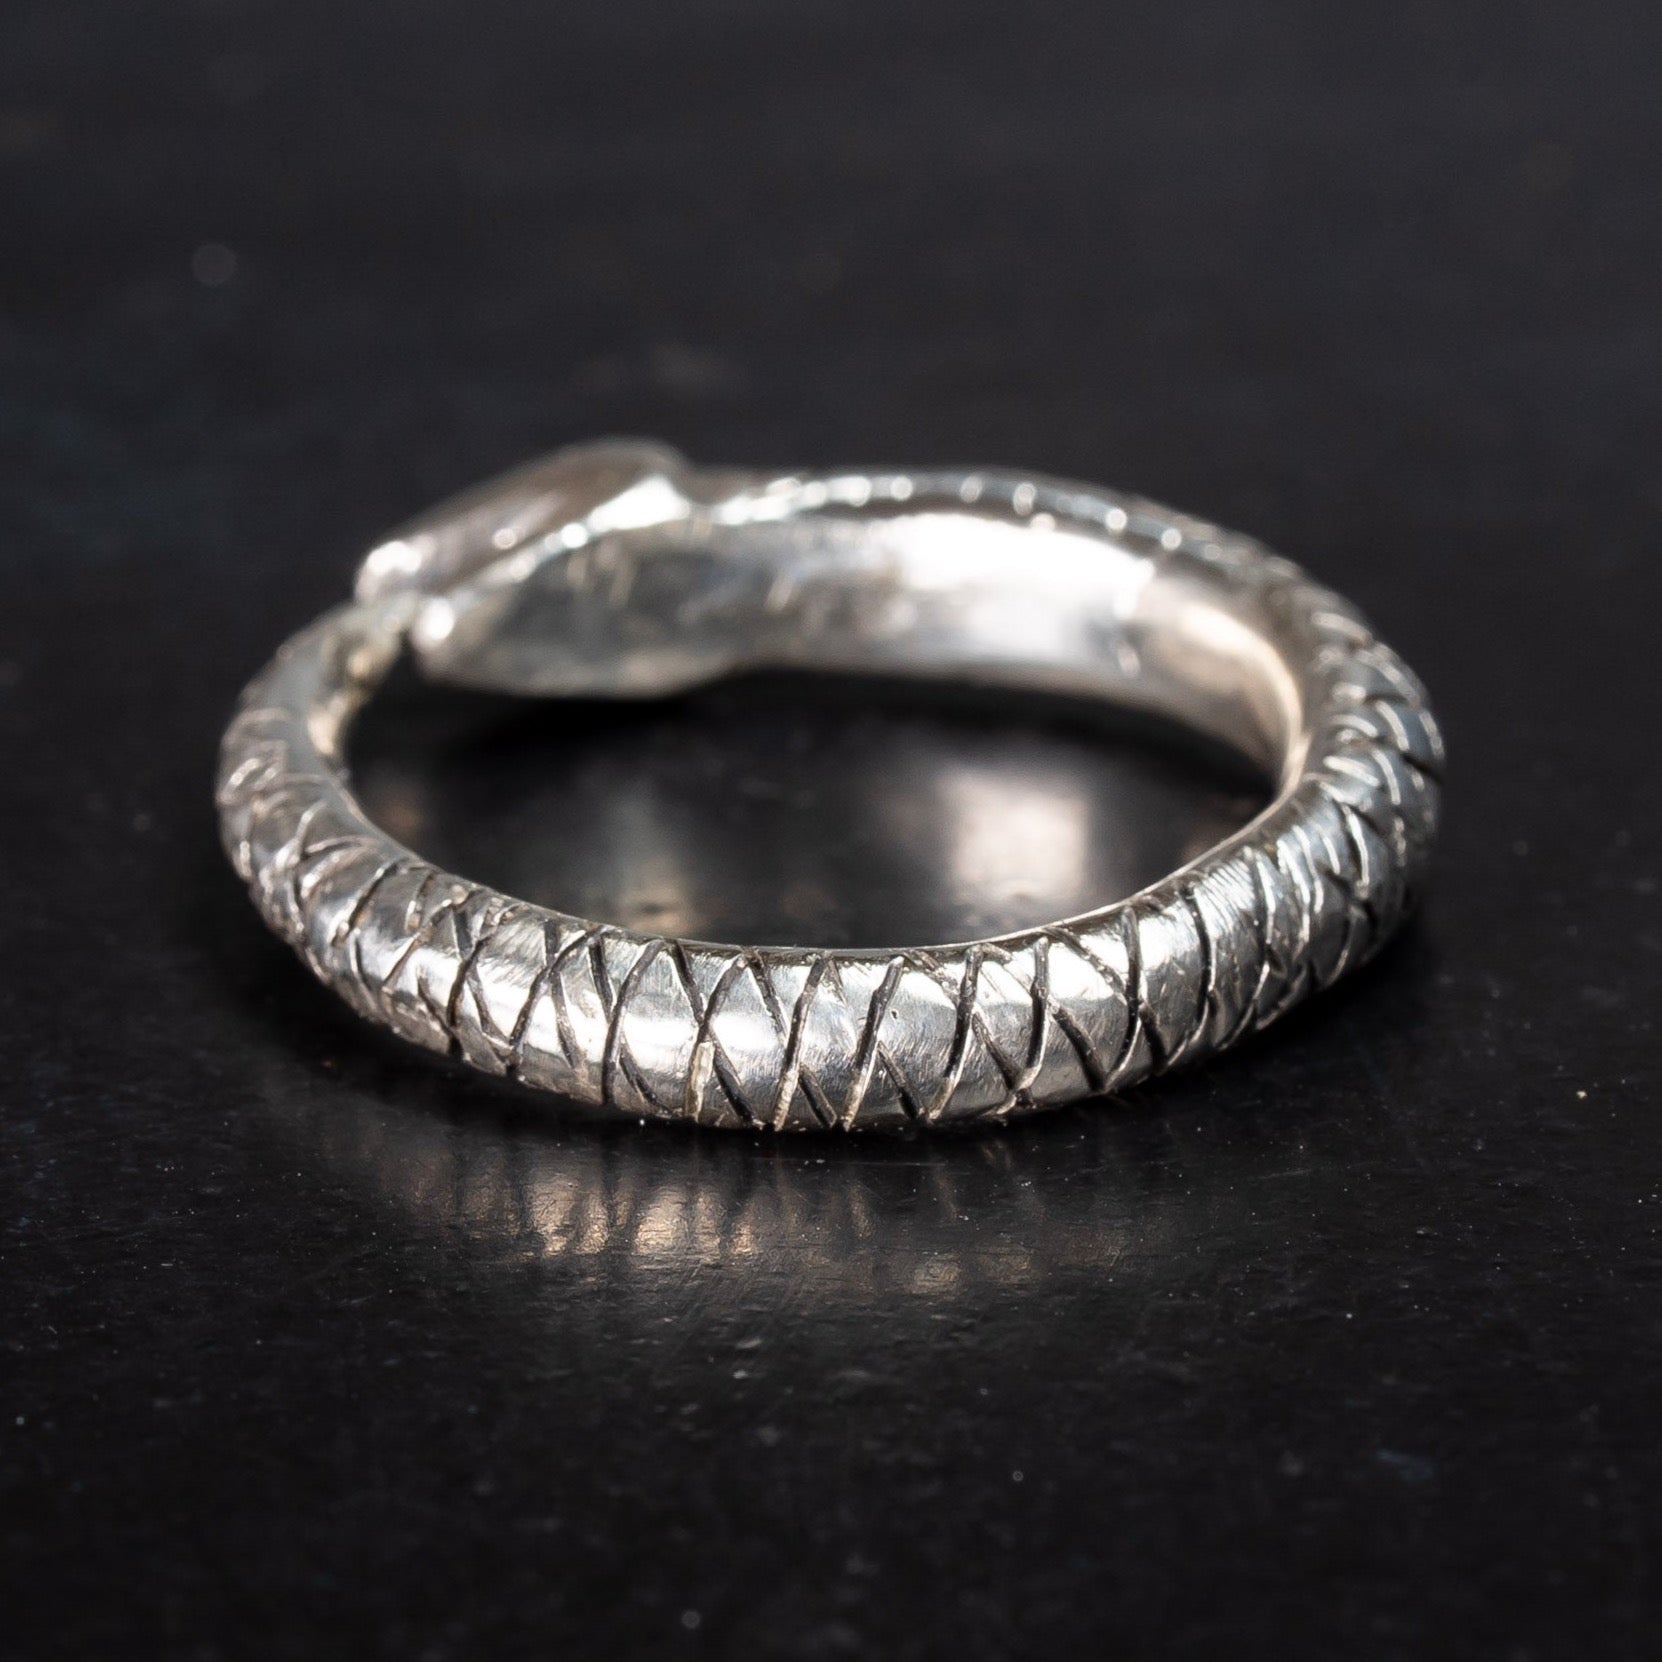 scaly sterling silver snake ring, ouroboros snake eating its own tail on black background